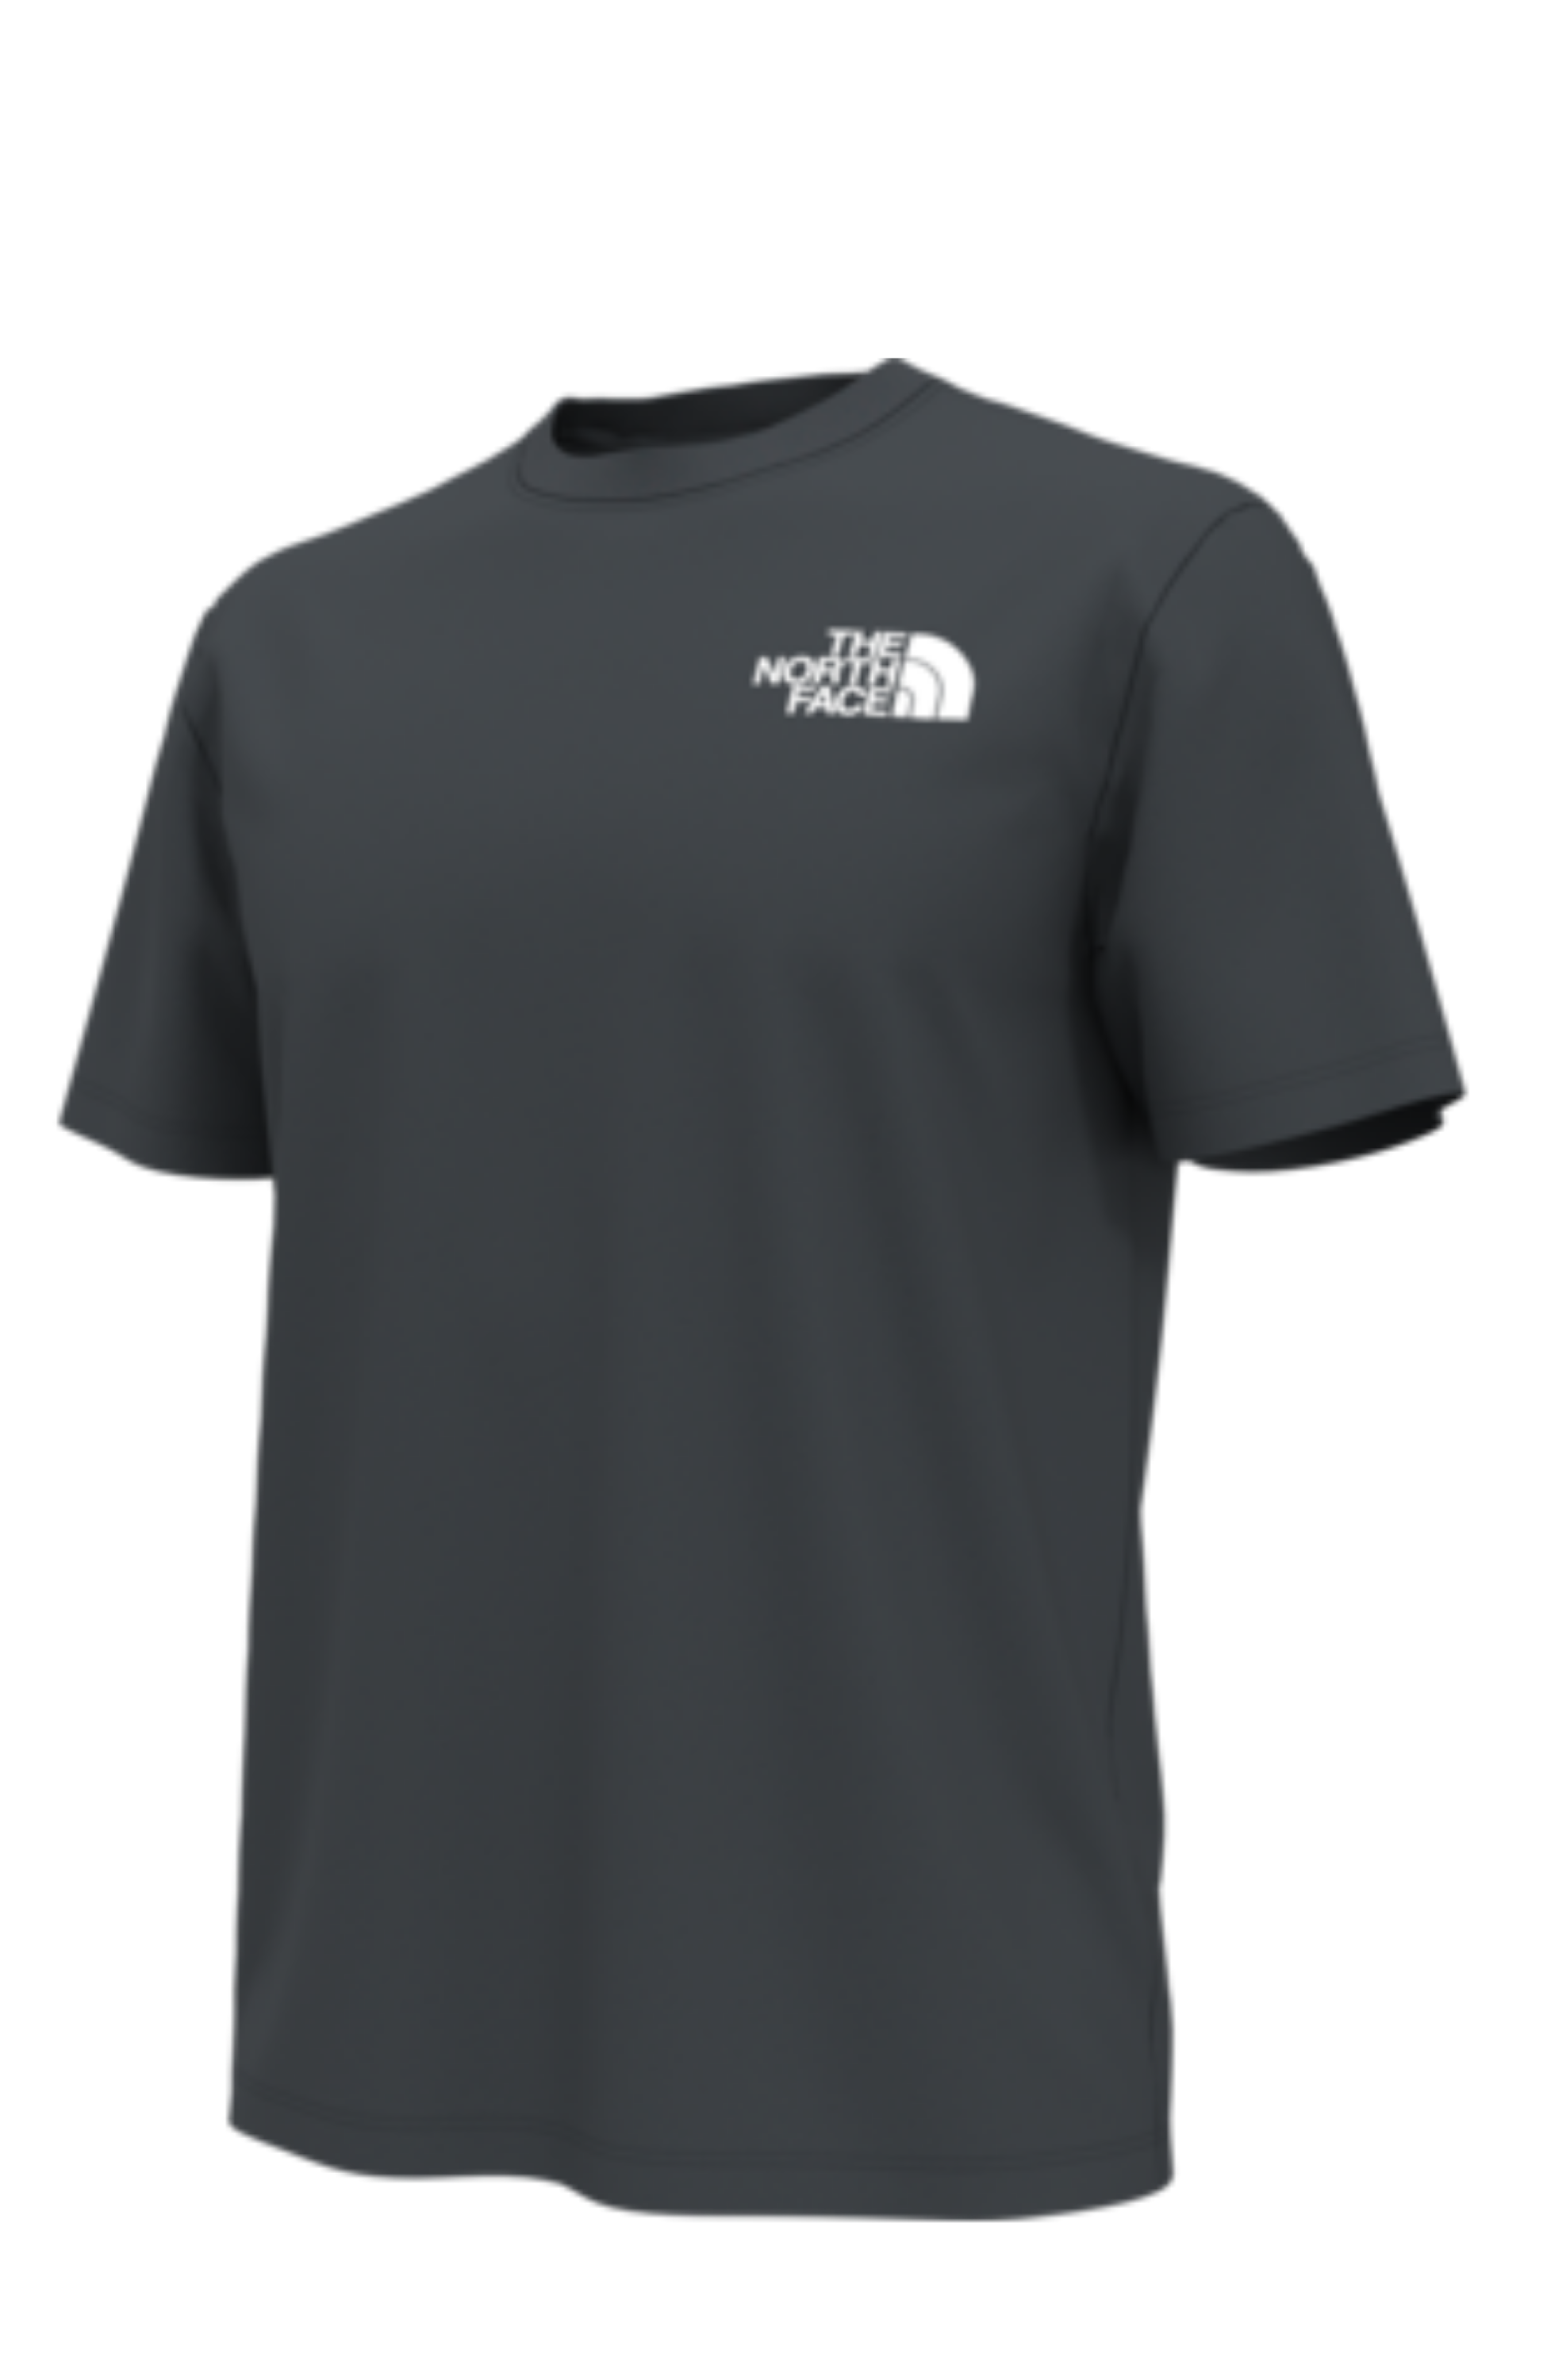 THE NORTH FACE - Men's regular T-shirt with contrasting logo